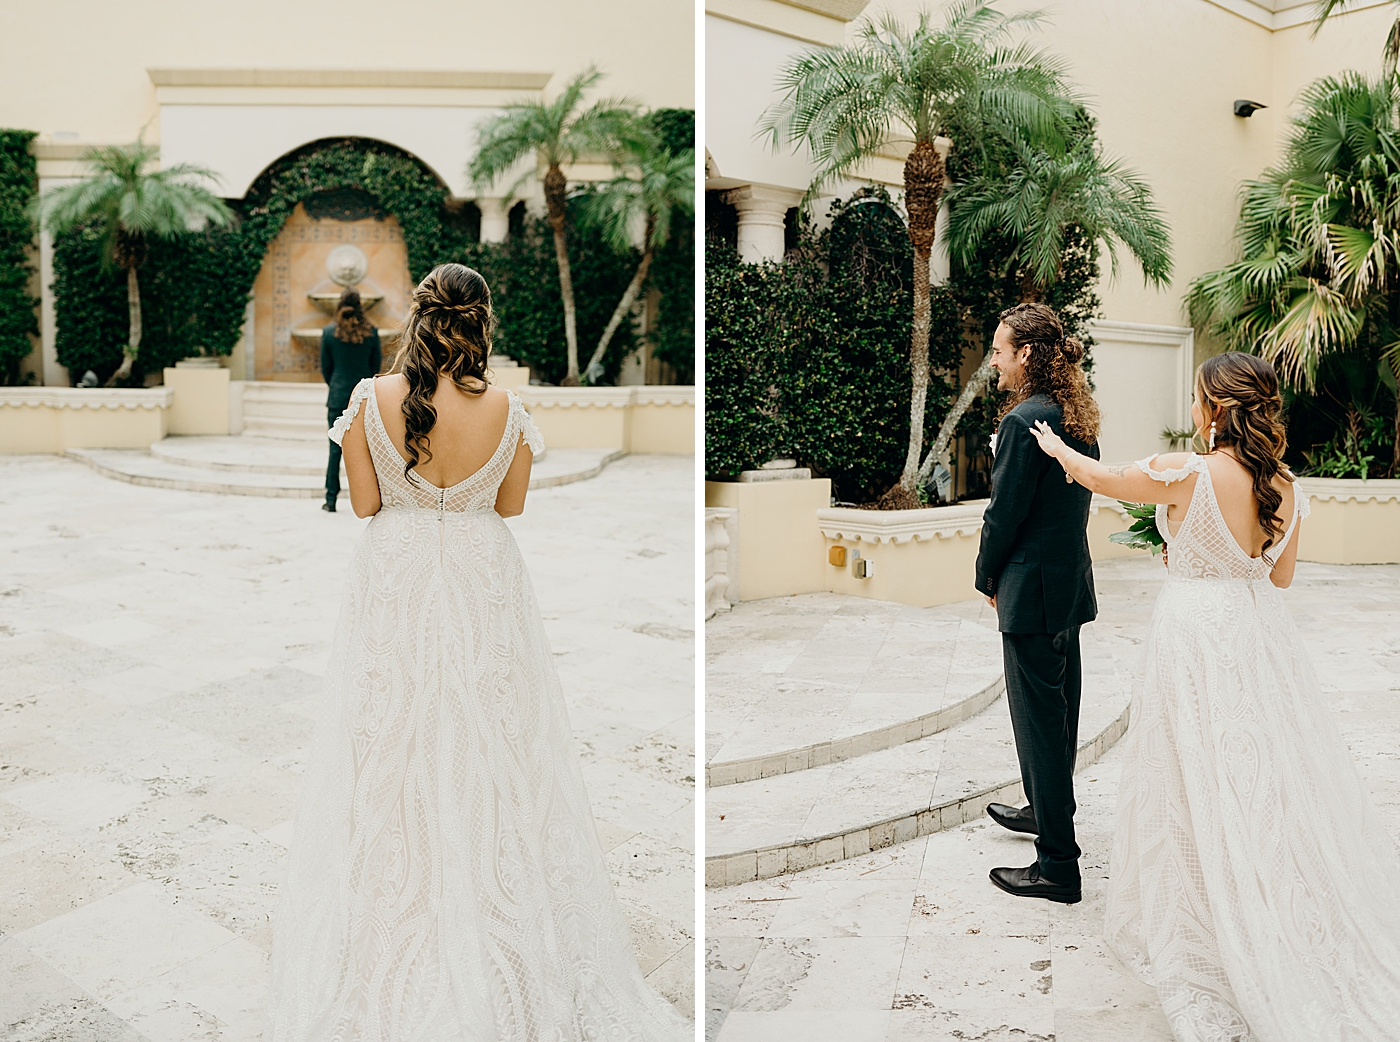 First Look Bride approaching Groom with his back turned Benvenuto Restaurant Wedding Photography captured by South Florida Wedding Photographer Maggie Alvarez Photography